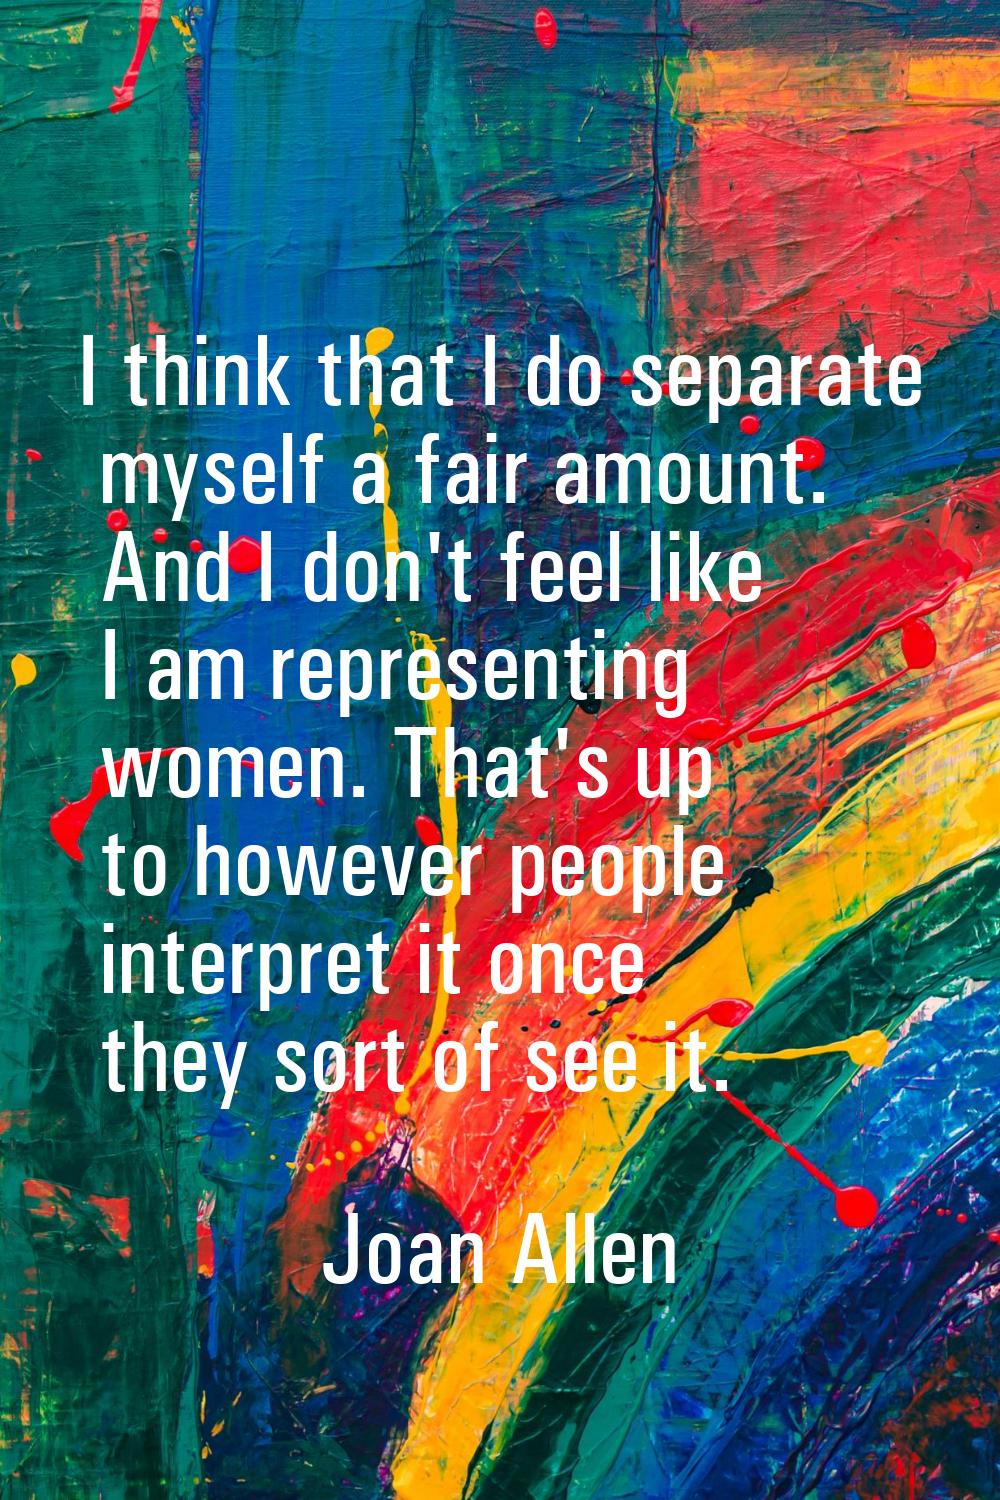 I think that I do separate myself a fair amount. And I don't feel like I am representing women. Tha